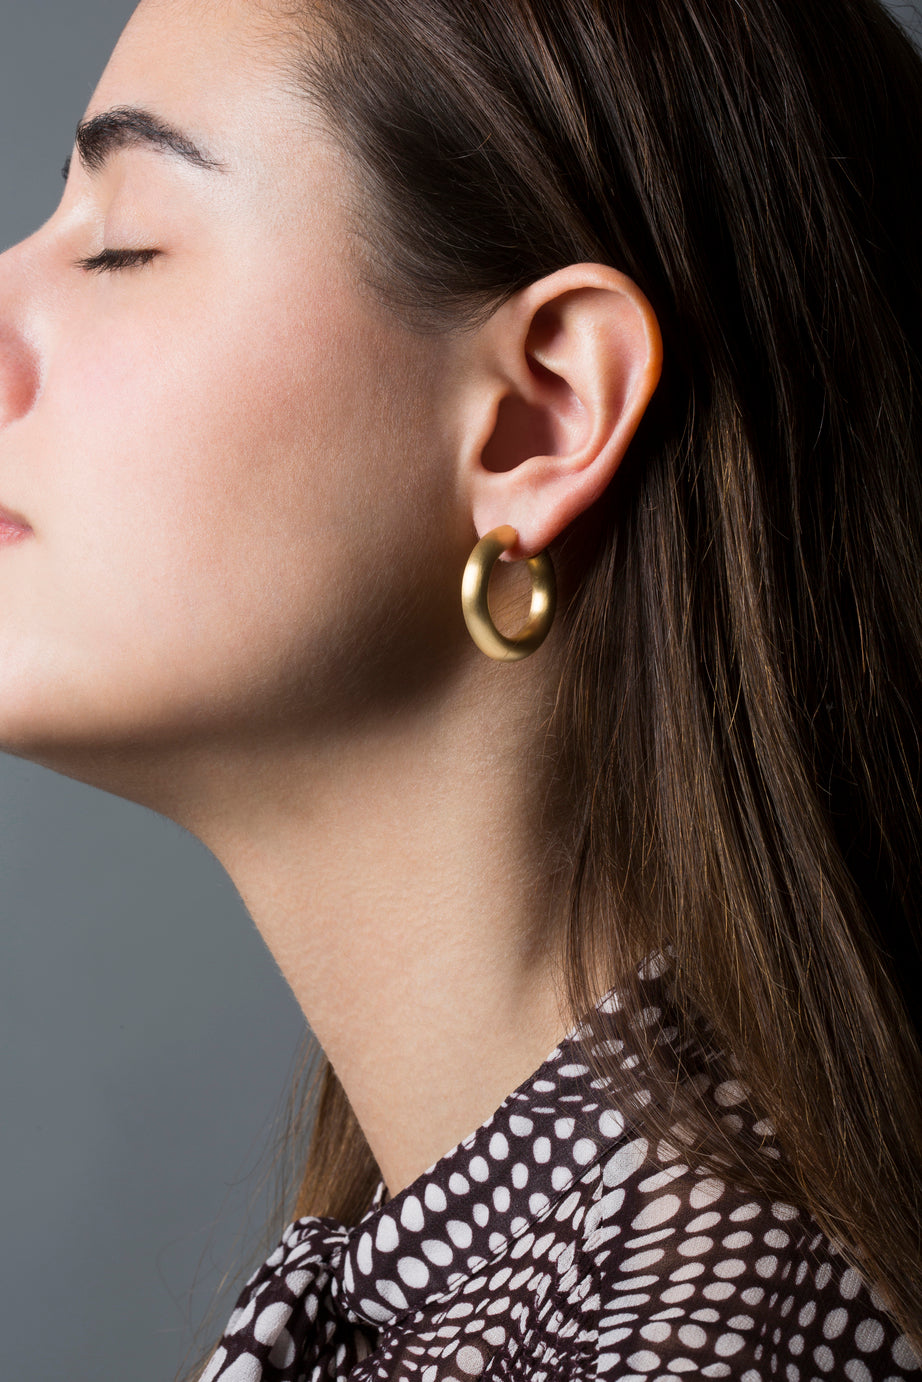 Chunky Hoops Gold-plated Sterling Silver. - Babs The Label